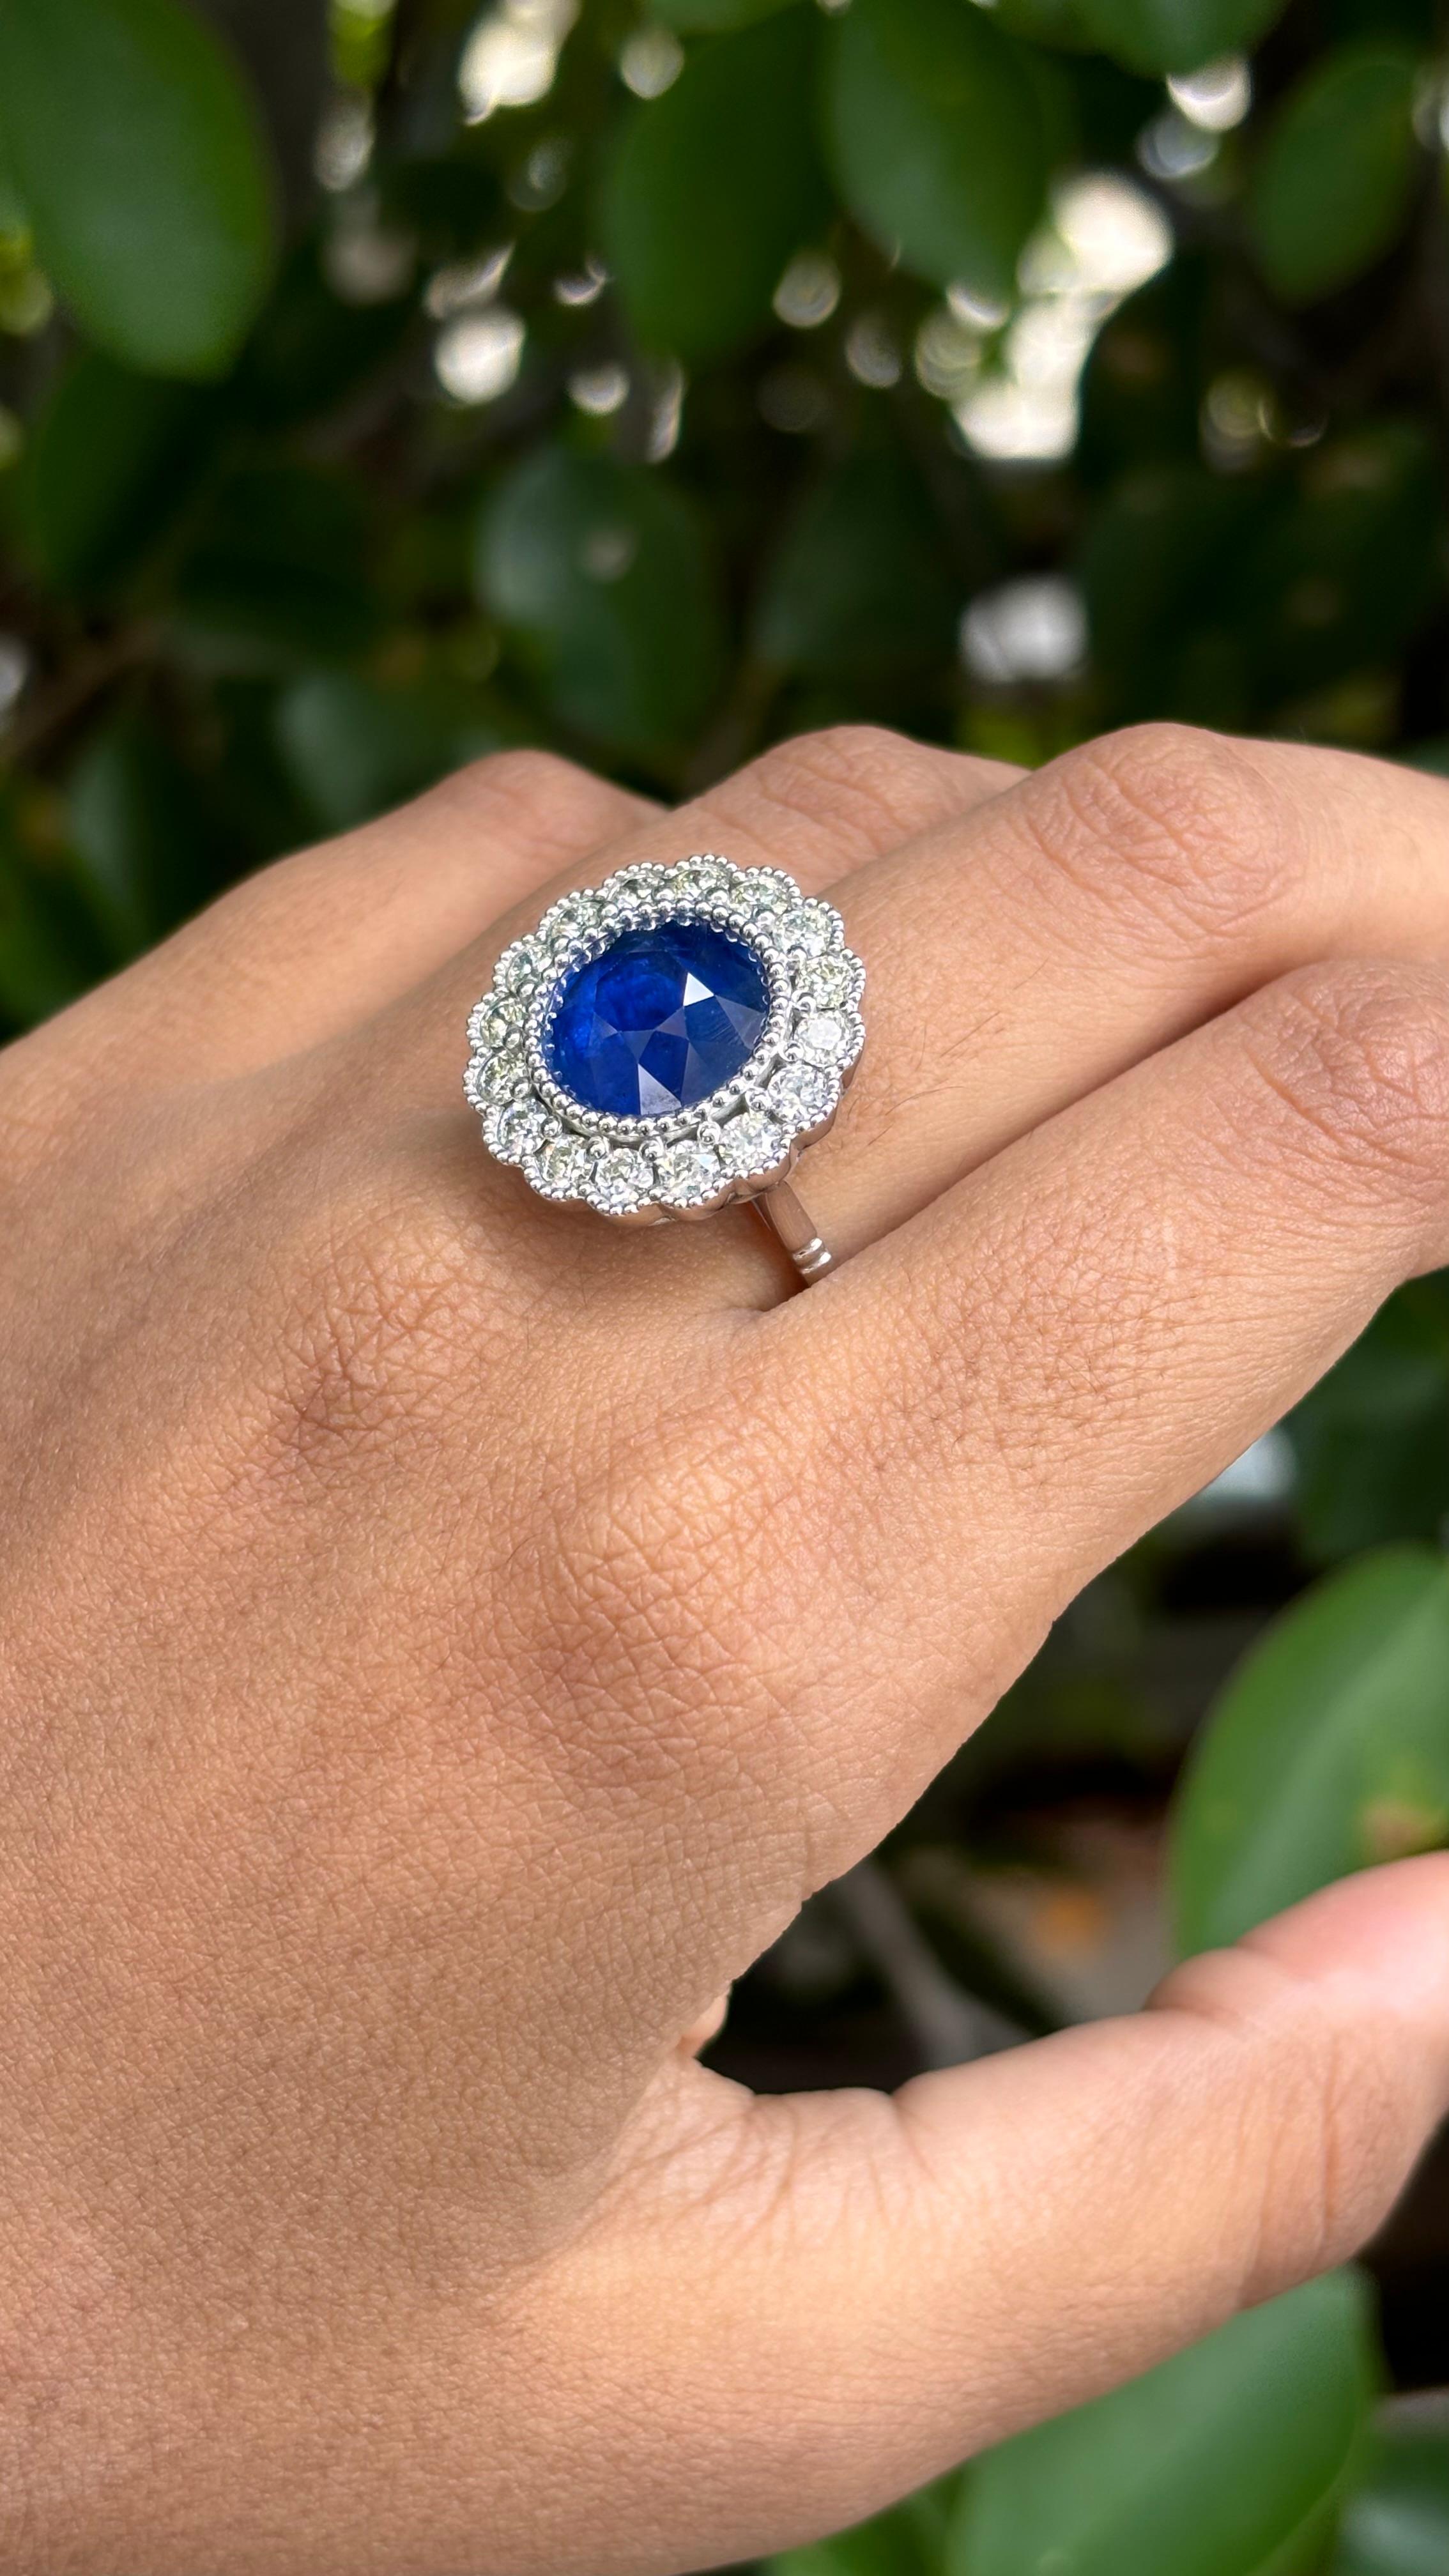 Round Cut 6.52 Ct Round Ceylon Sapphire Ring with Old Mine Cut Diamonds in 18K White Gold For Sale